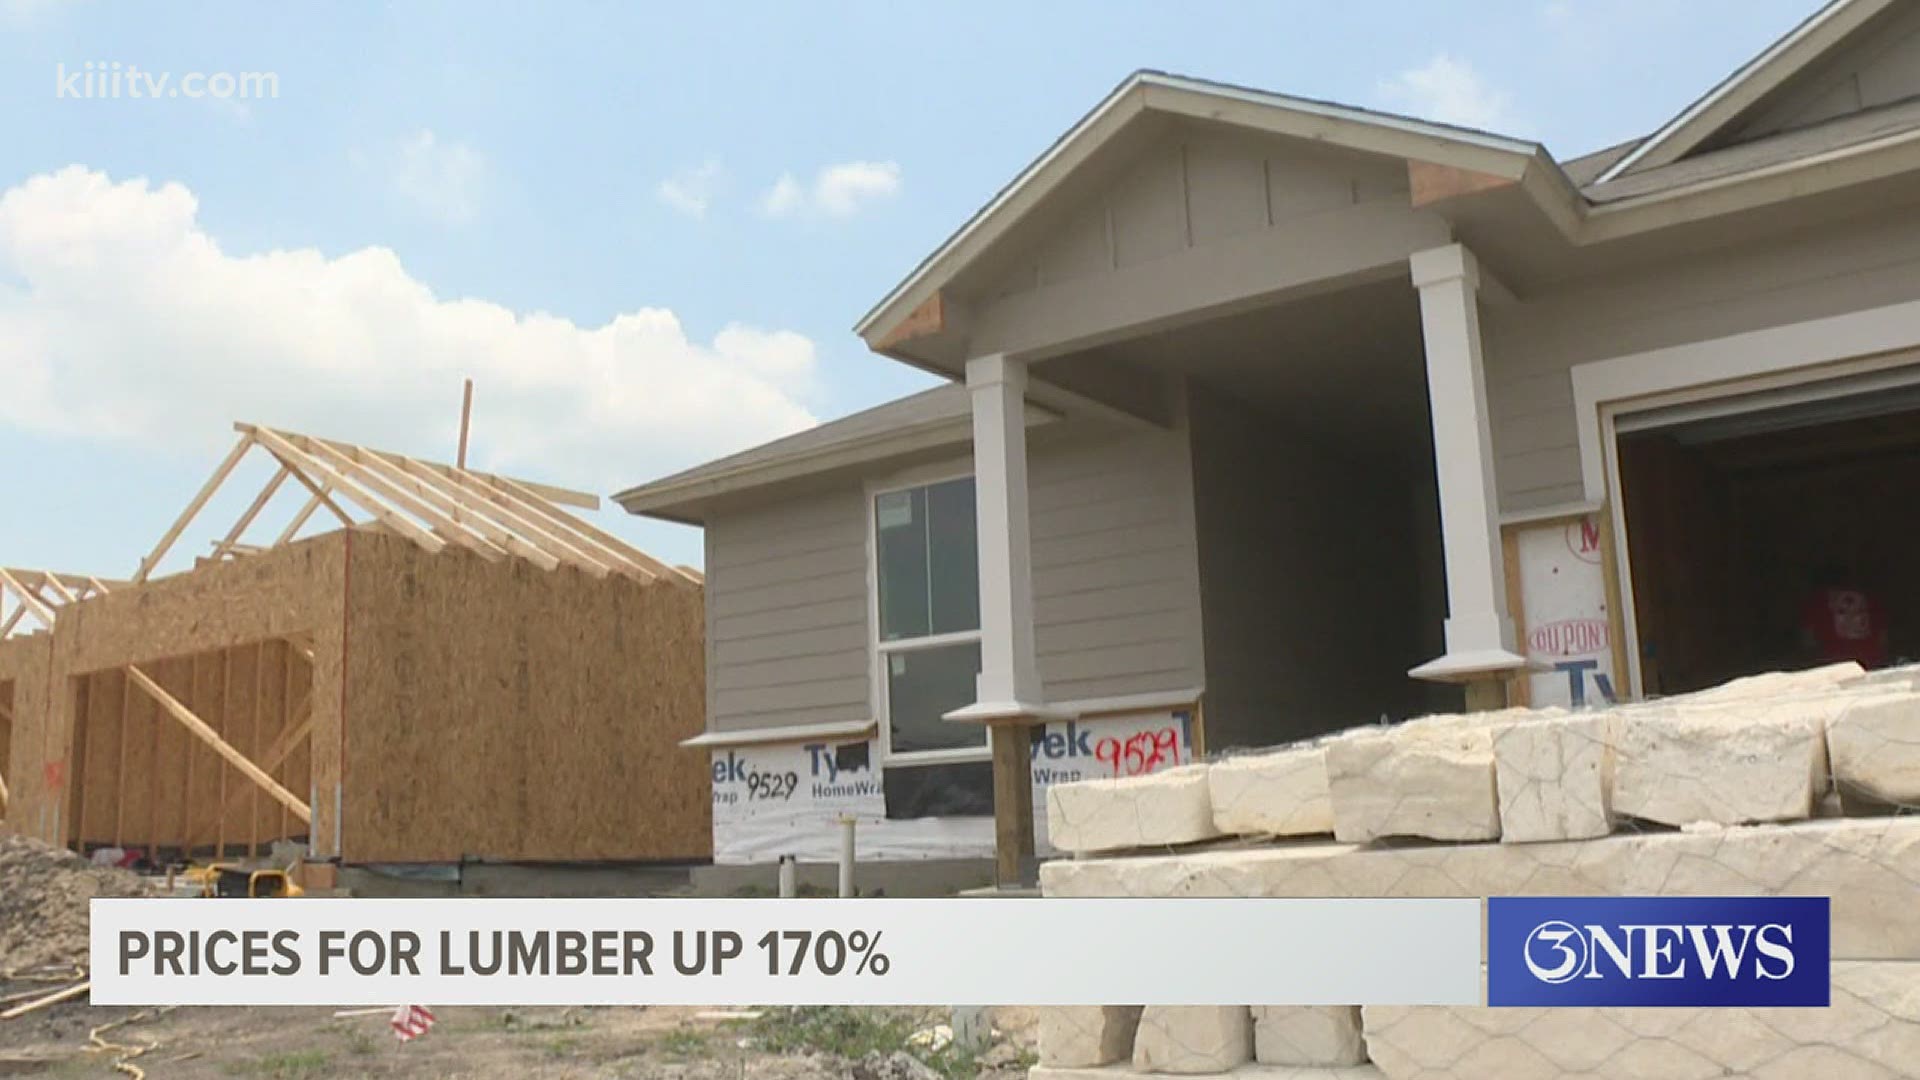 The National Association of Homebuilders has estimated that the price for lumber right now is going to add at least $24,000 to the price of a new single-family home.